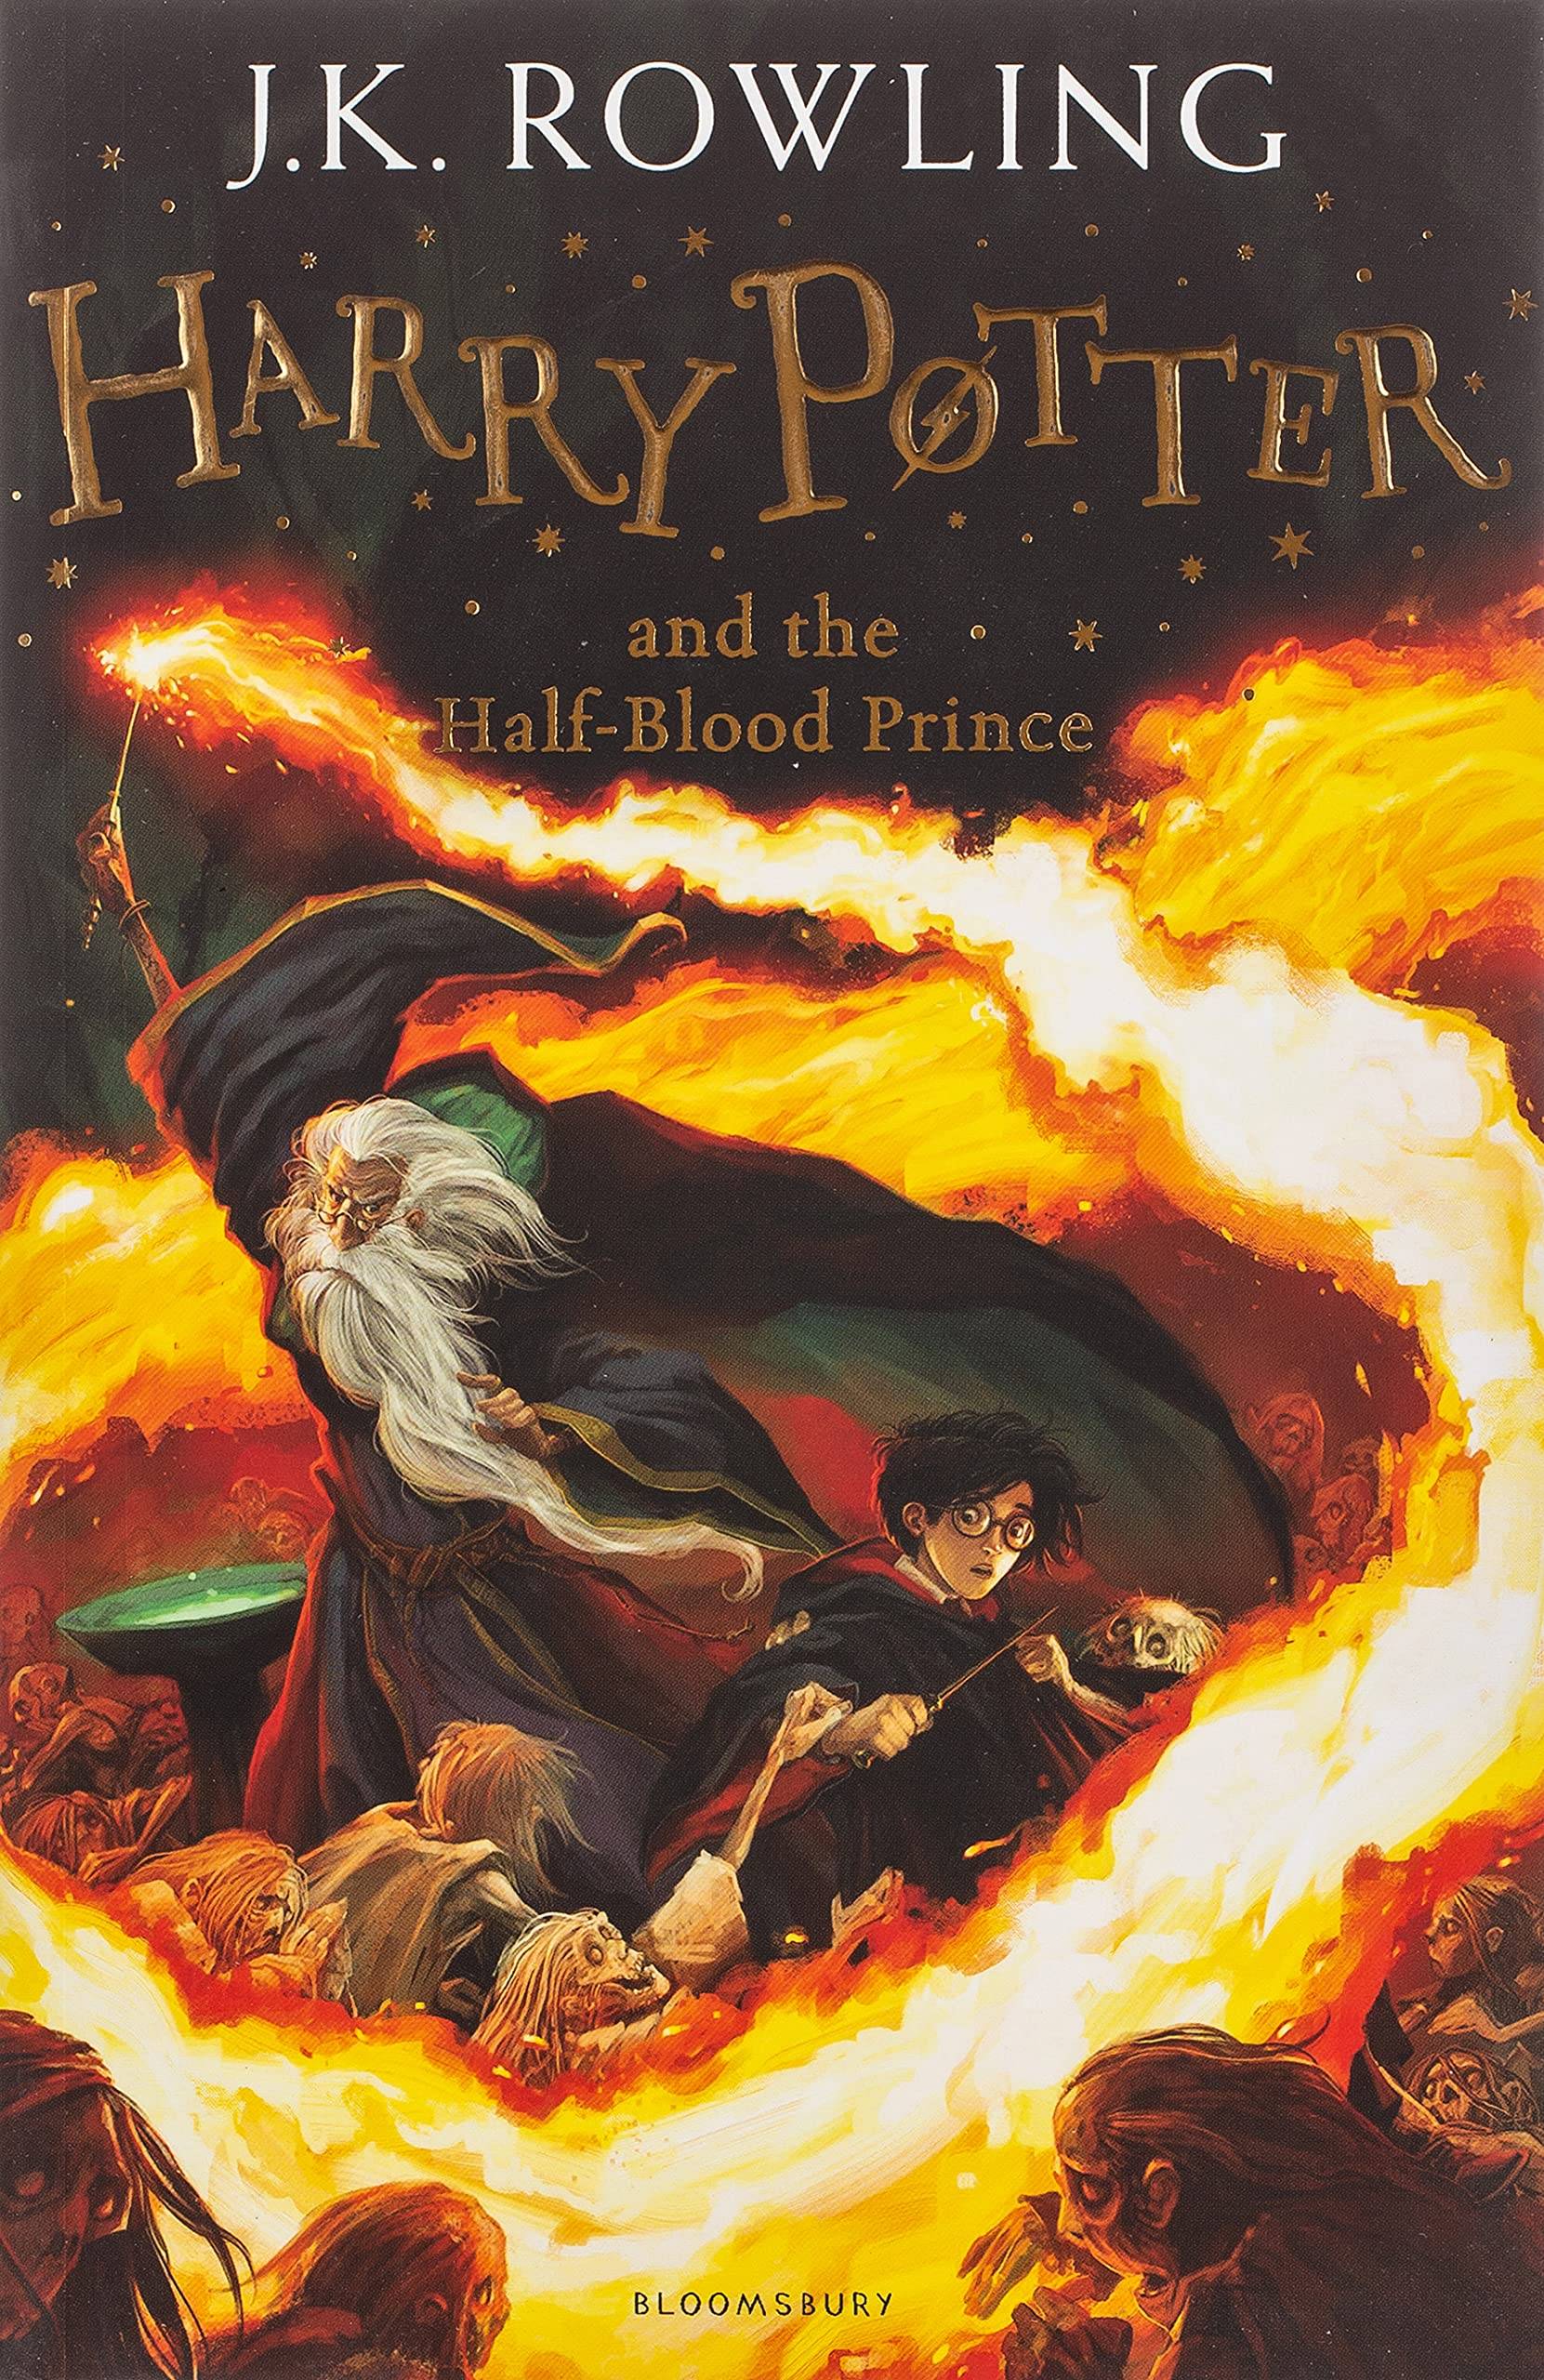 IMG : Harry Potter and the half blood prince